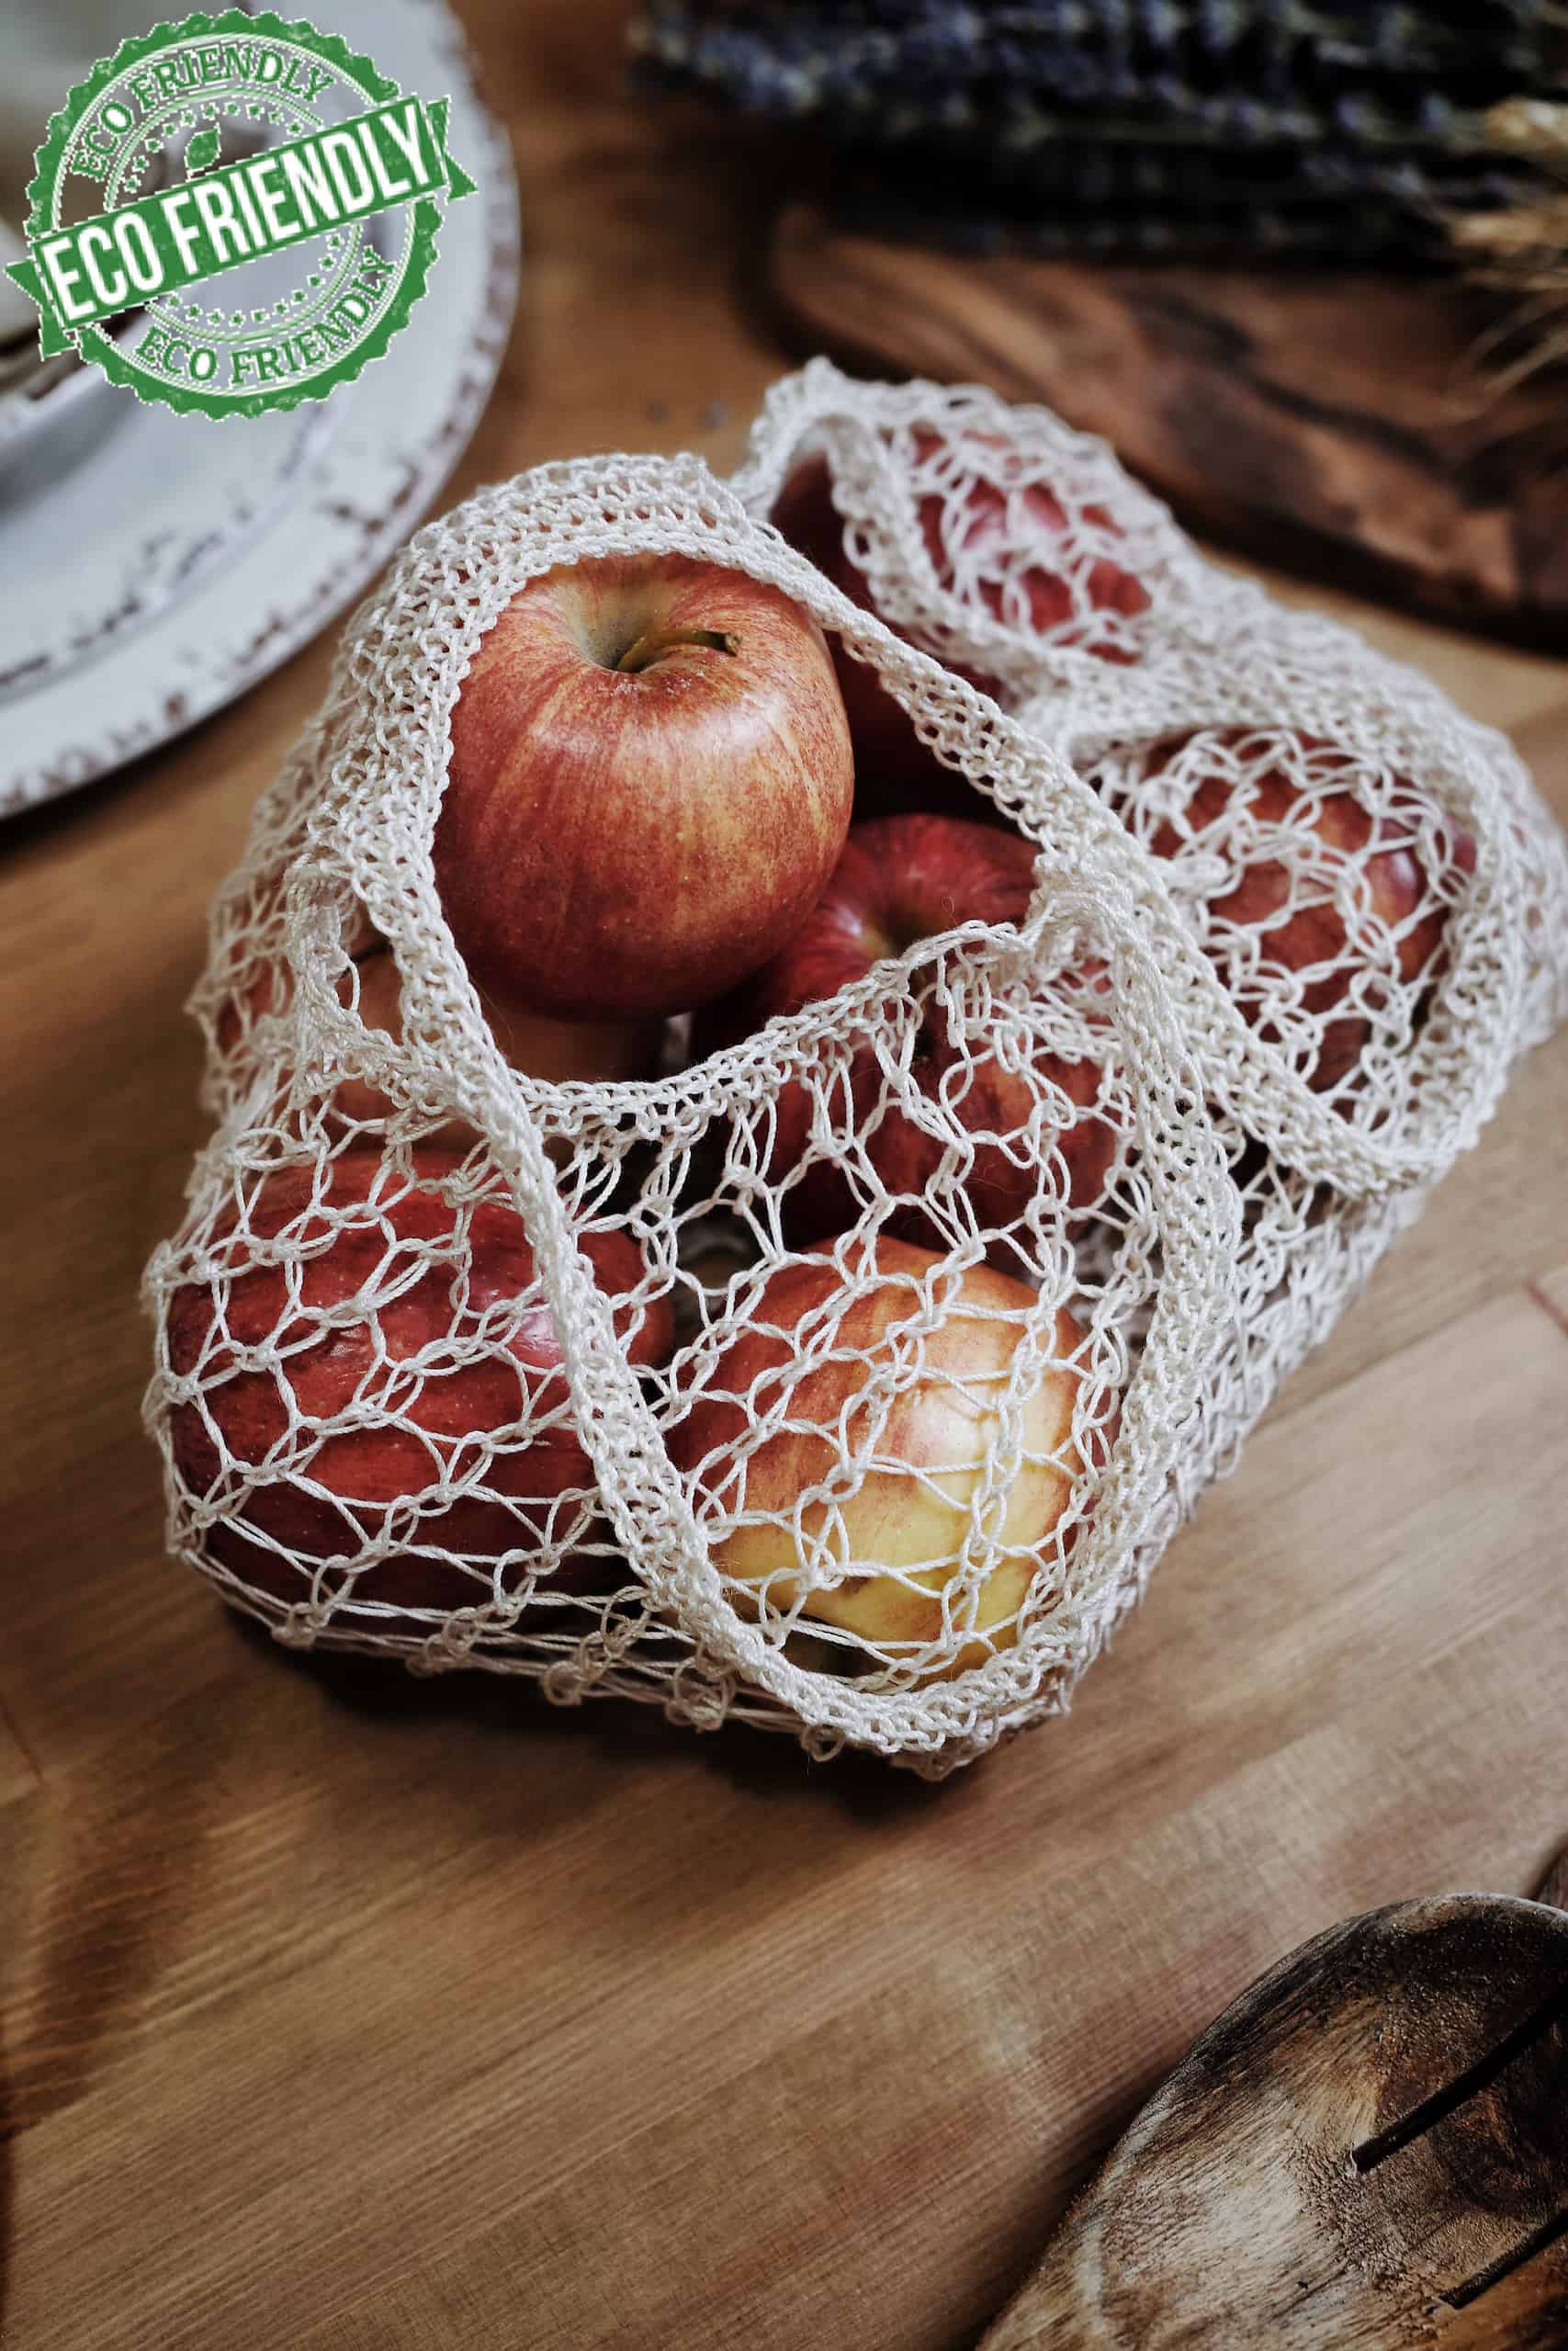 MIXC Fruit Protection Bags,50 Pcs 6''×8''Fruit Netting Bags for Fruit Trees  Fruit Cover Mesh Bag with Drawstring (6''×8'') : Amazon.in: Bags, Wallets  and Luggage